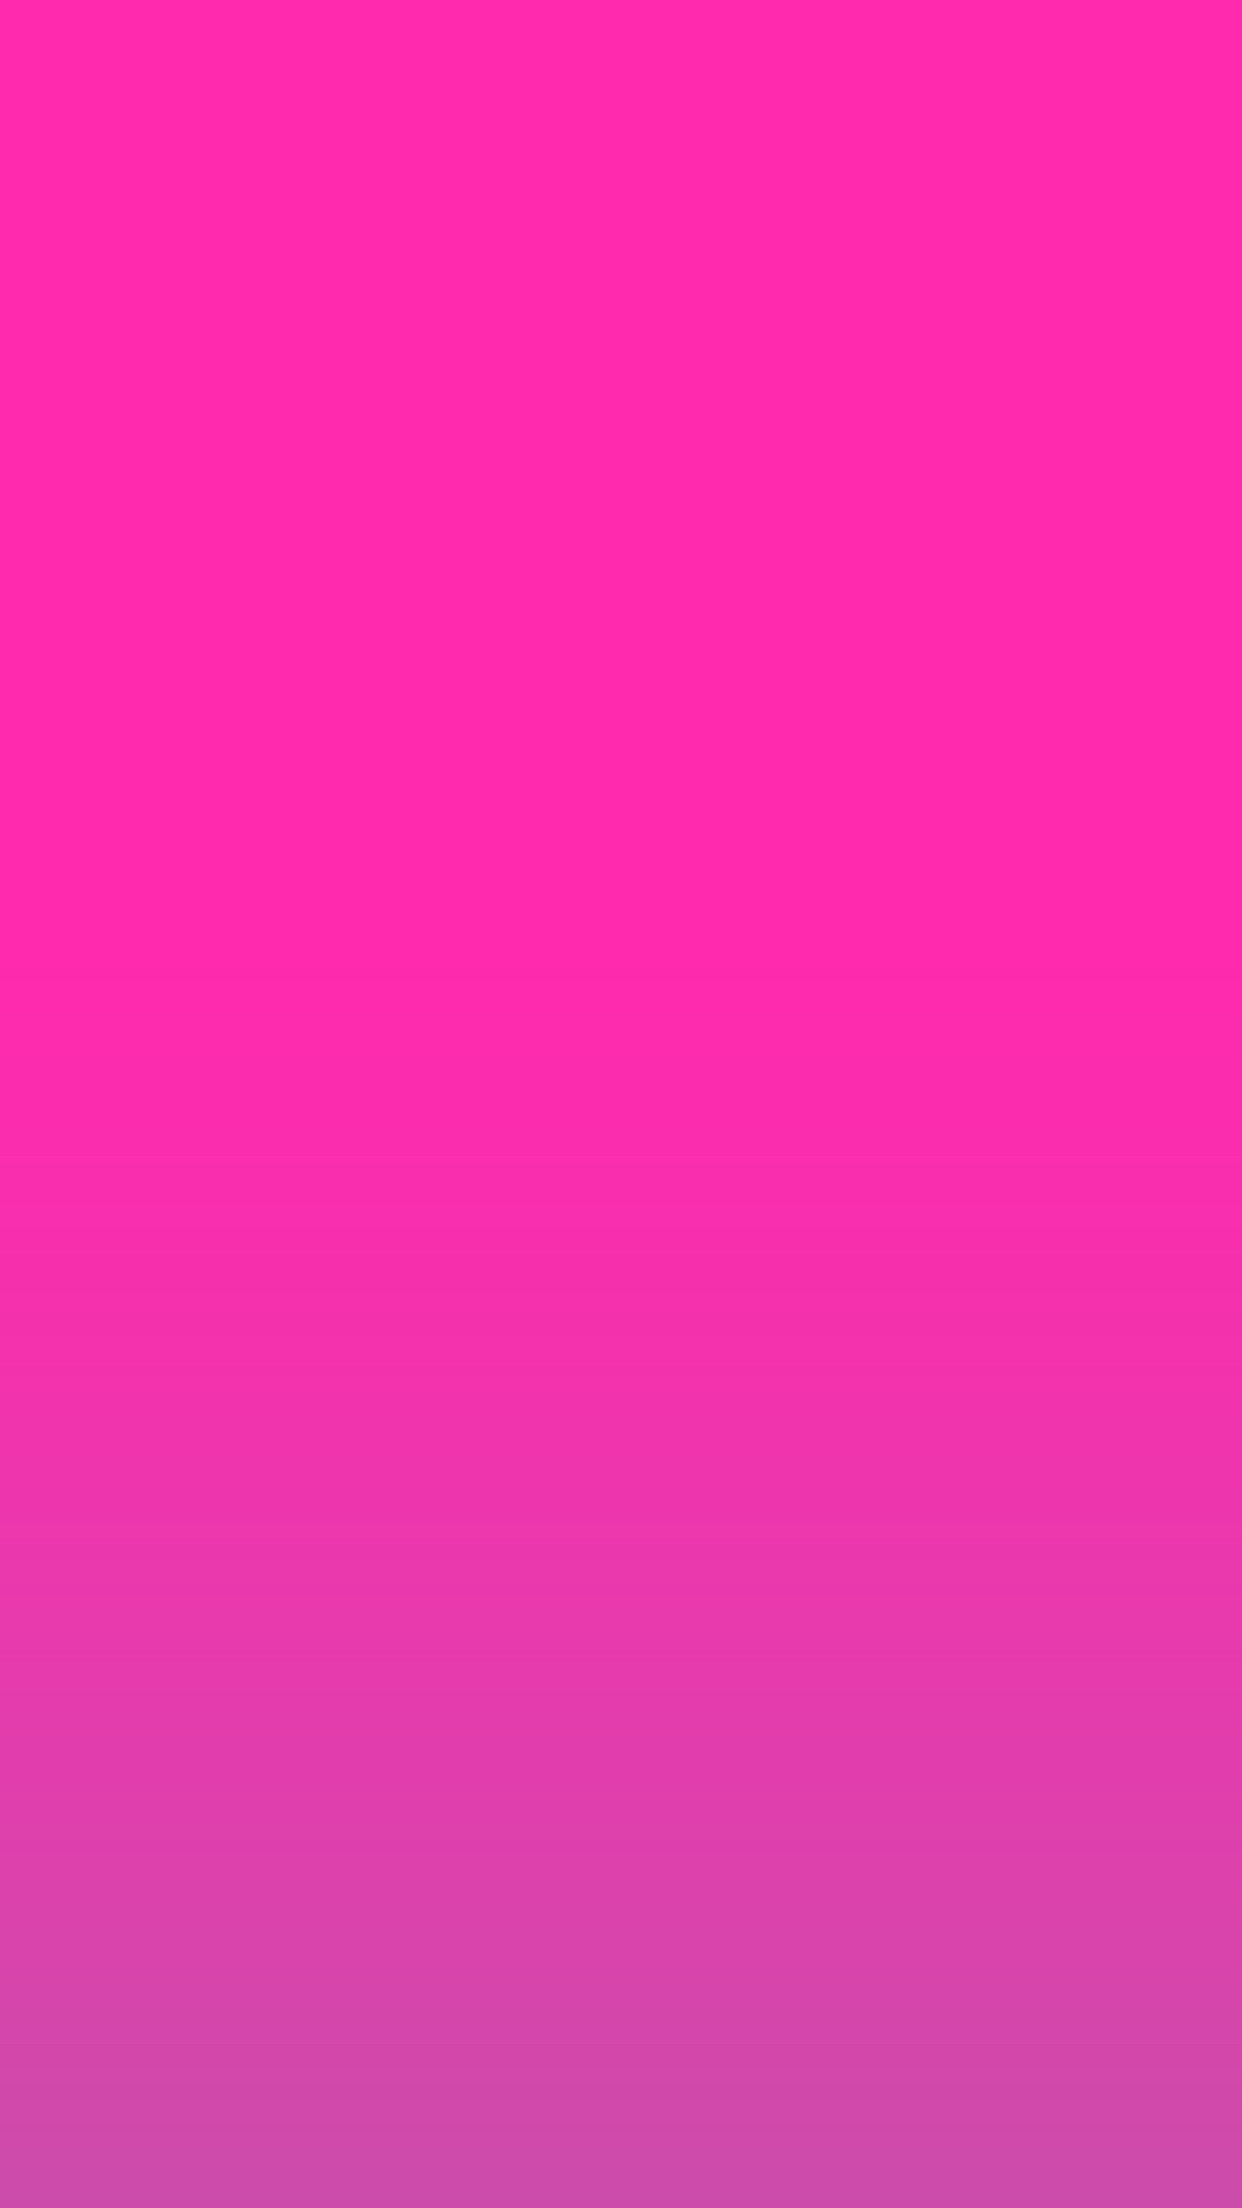 85876 Pink Ombre Background Images Stock Photos  Vectors  Shutterstock